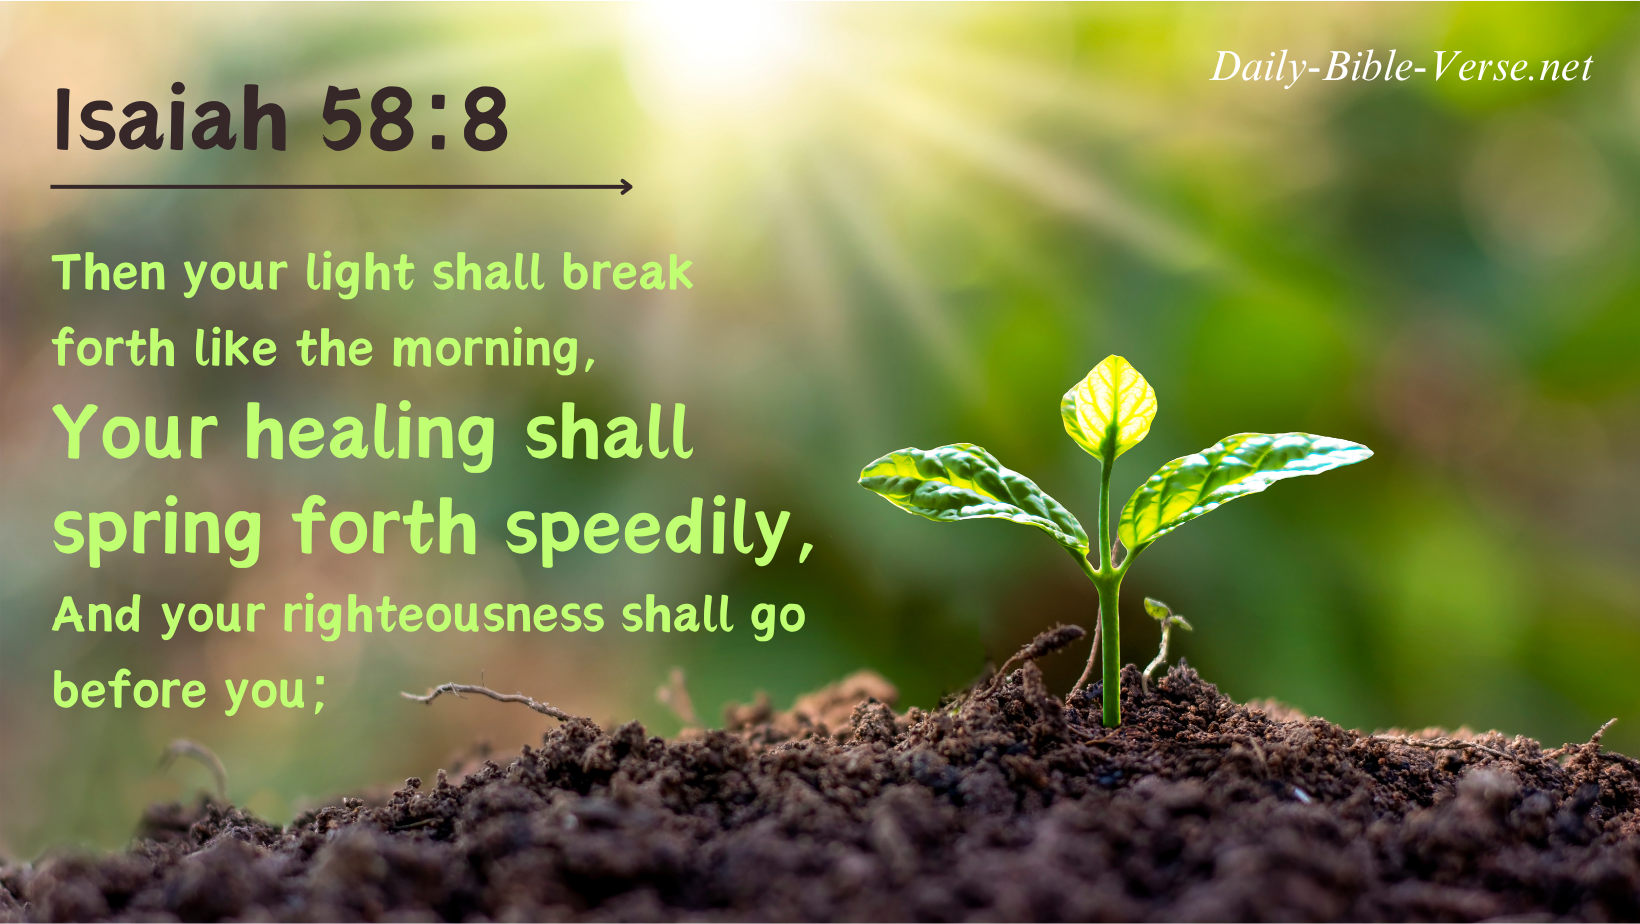 Then your light shall break forth like the morning, Your healing shall spring forth speedily, And your righteousness shall go before you;